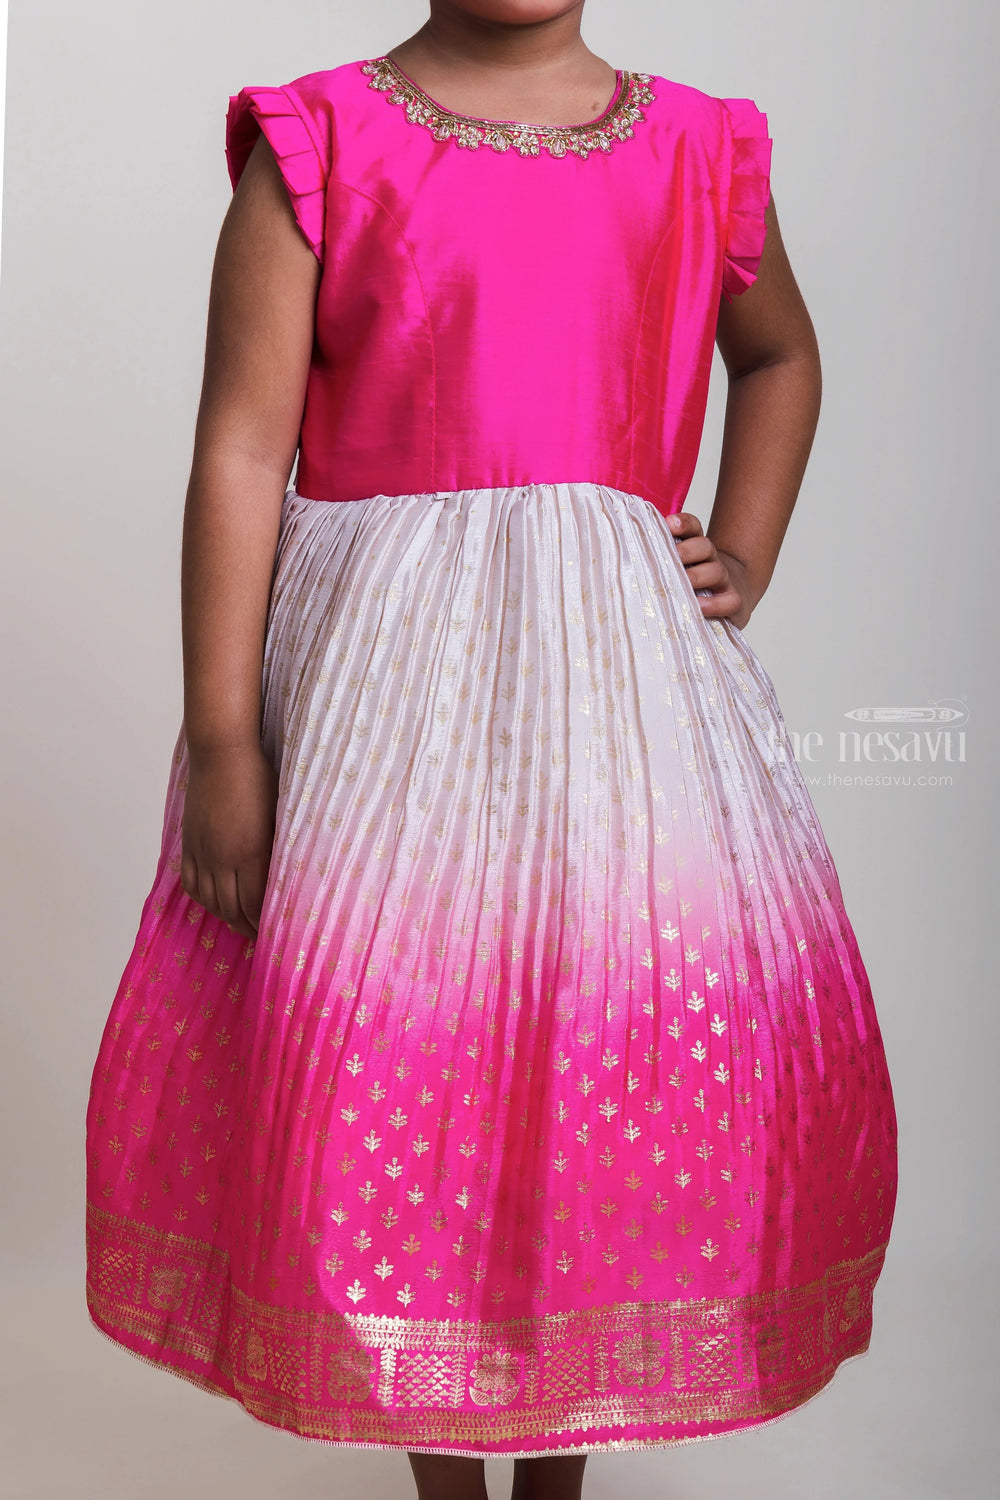 The Nesavu Silk Party Frock Pink Celebration Frock in Foil Printed Pleated Chinon Silk for Baby Girl Nesavu Baby Girl Comfy Daily Wear | Shop Sleeveless Cotton Gowns | The Nesavu